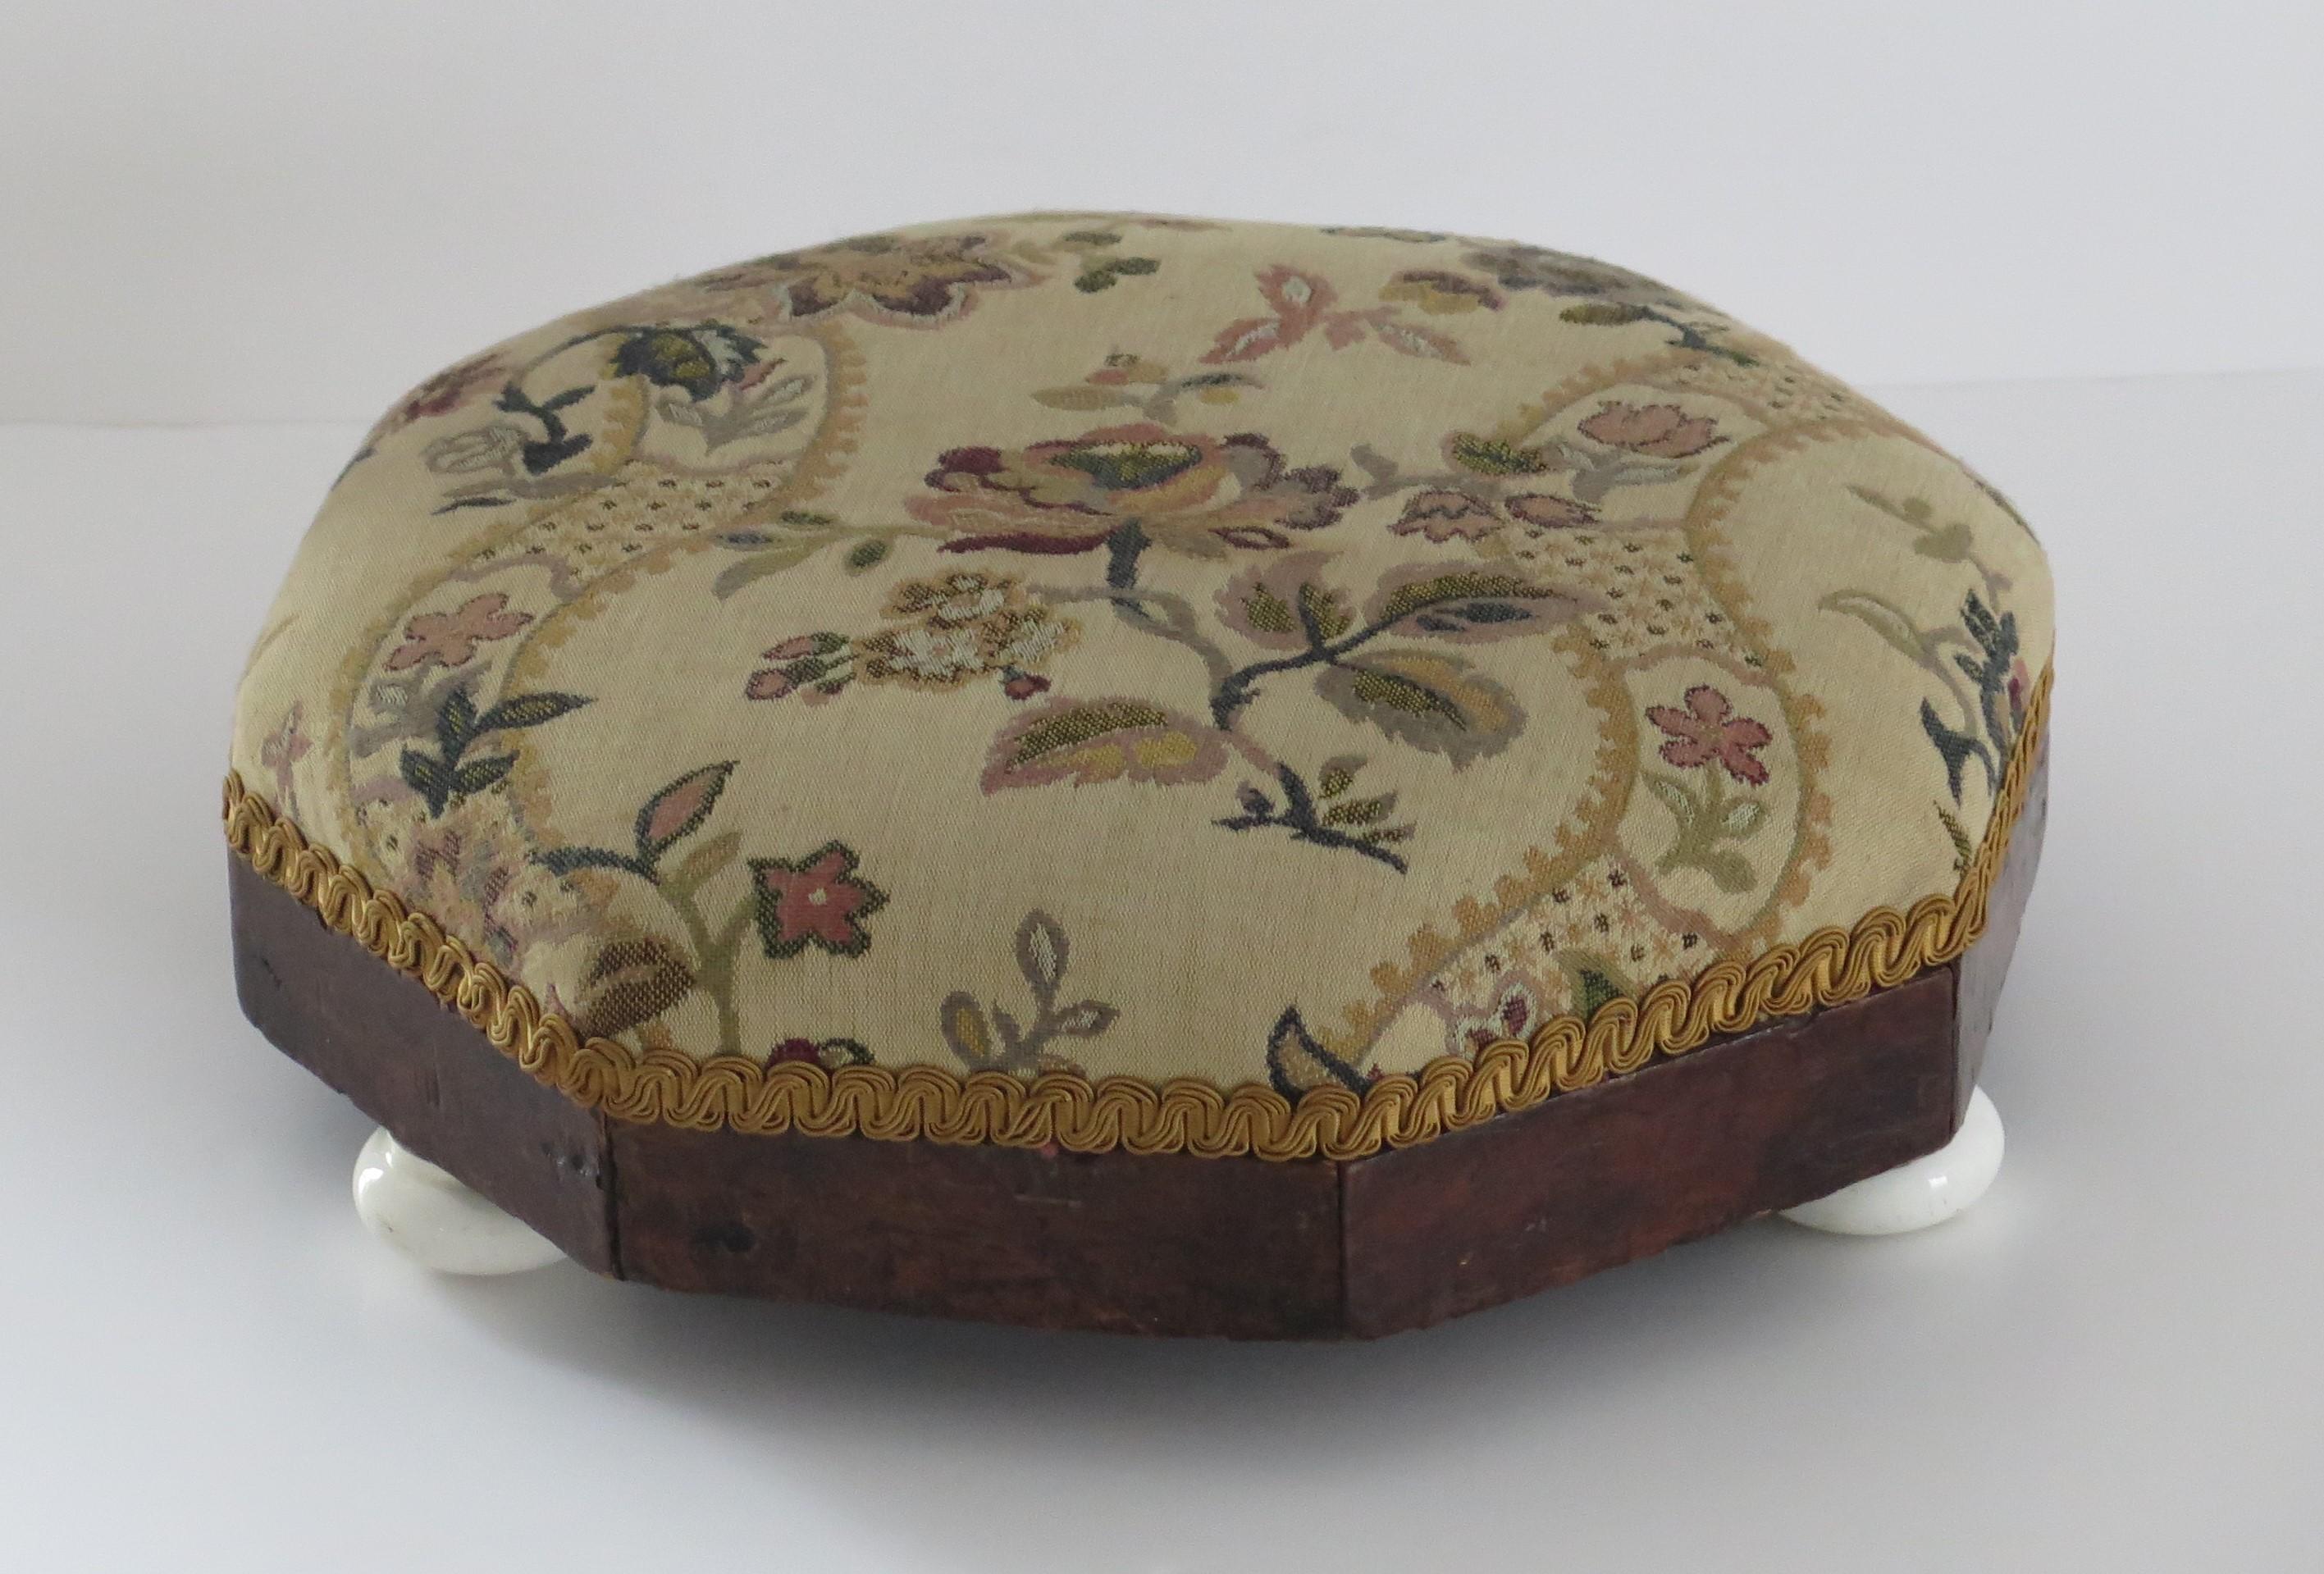 This is a very attractive, unusual and original English Footstool from very early in the Victorian period of the 19th century, circa 1840.

The foot stool has a rare and very decorative octagonal shape, the frame being made from walnut over a